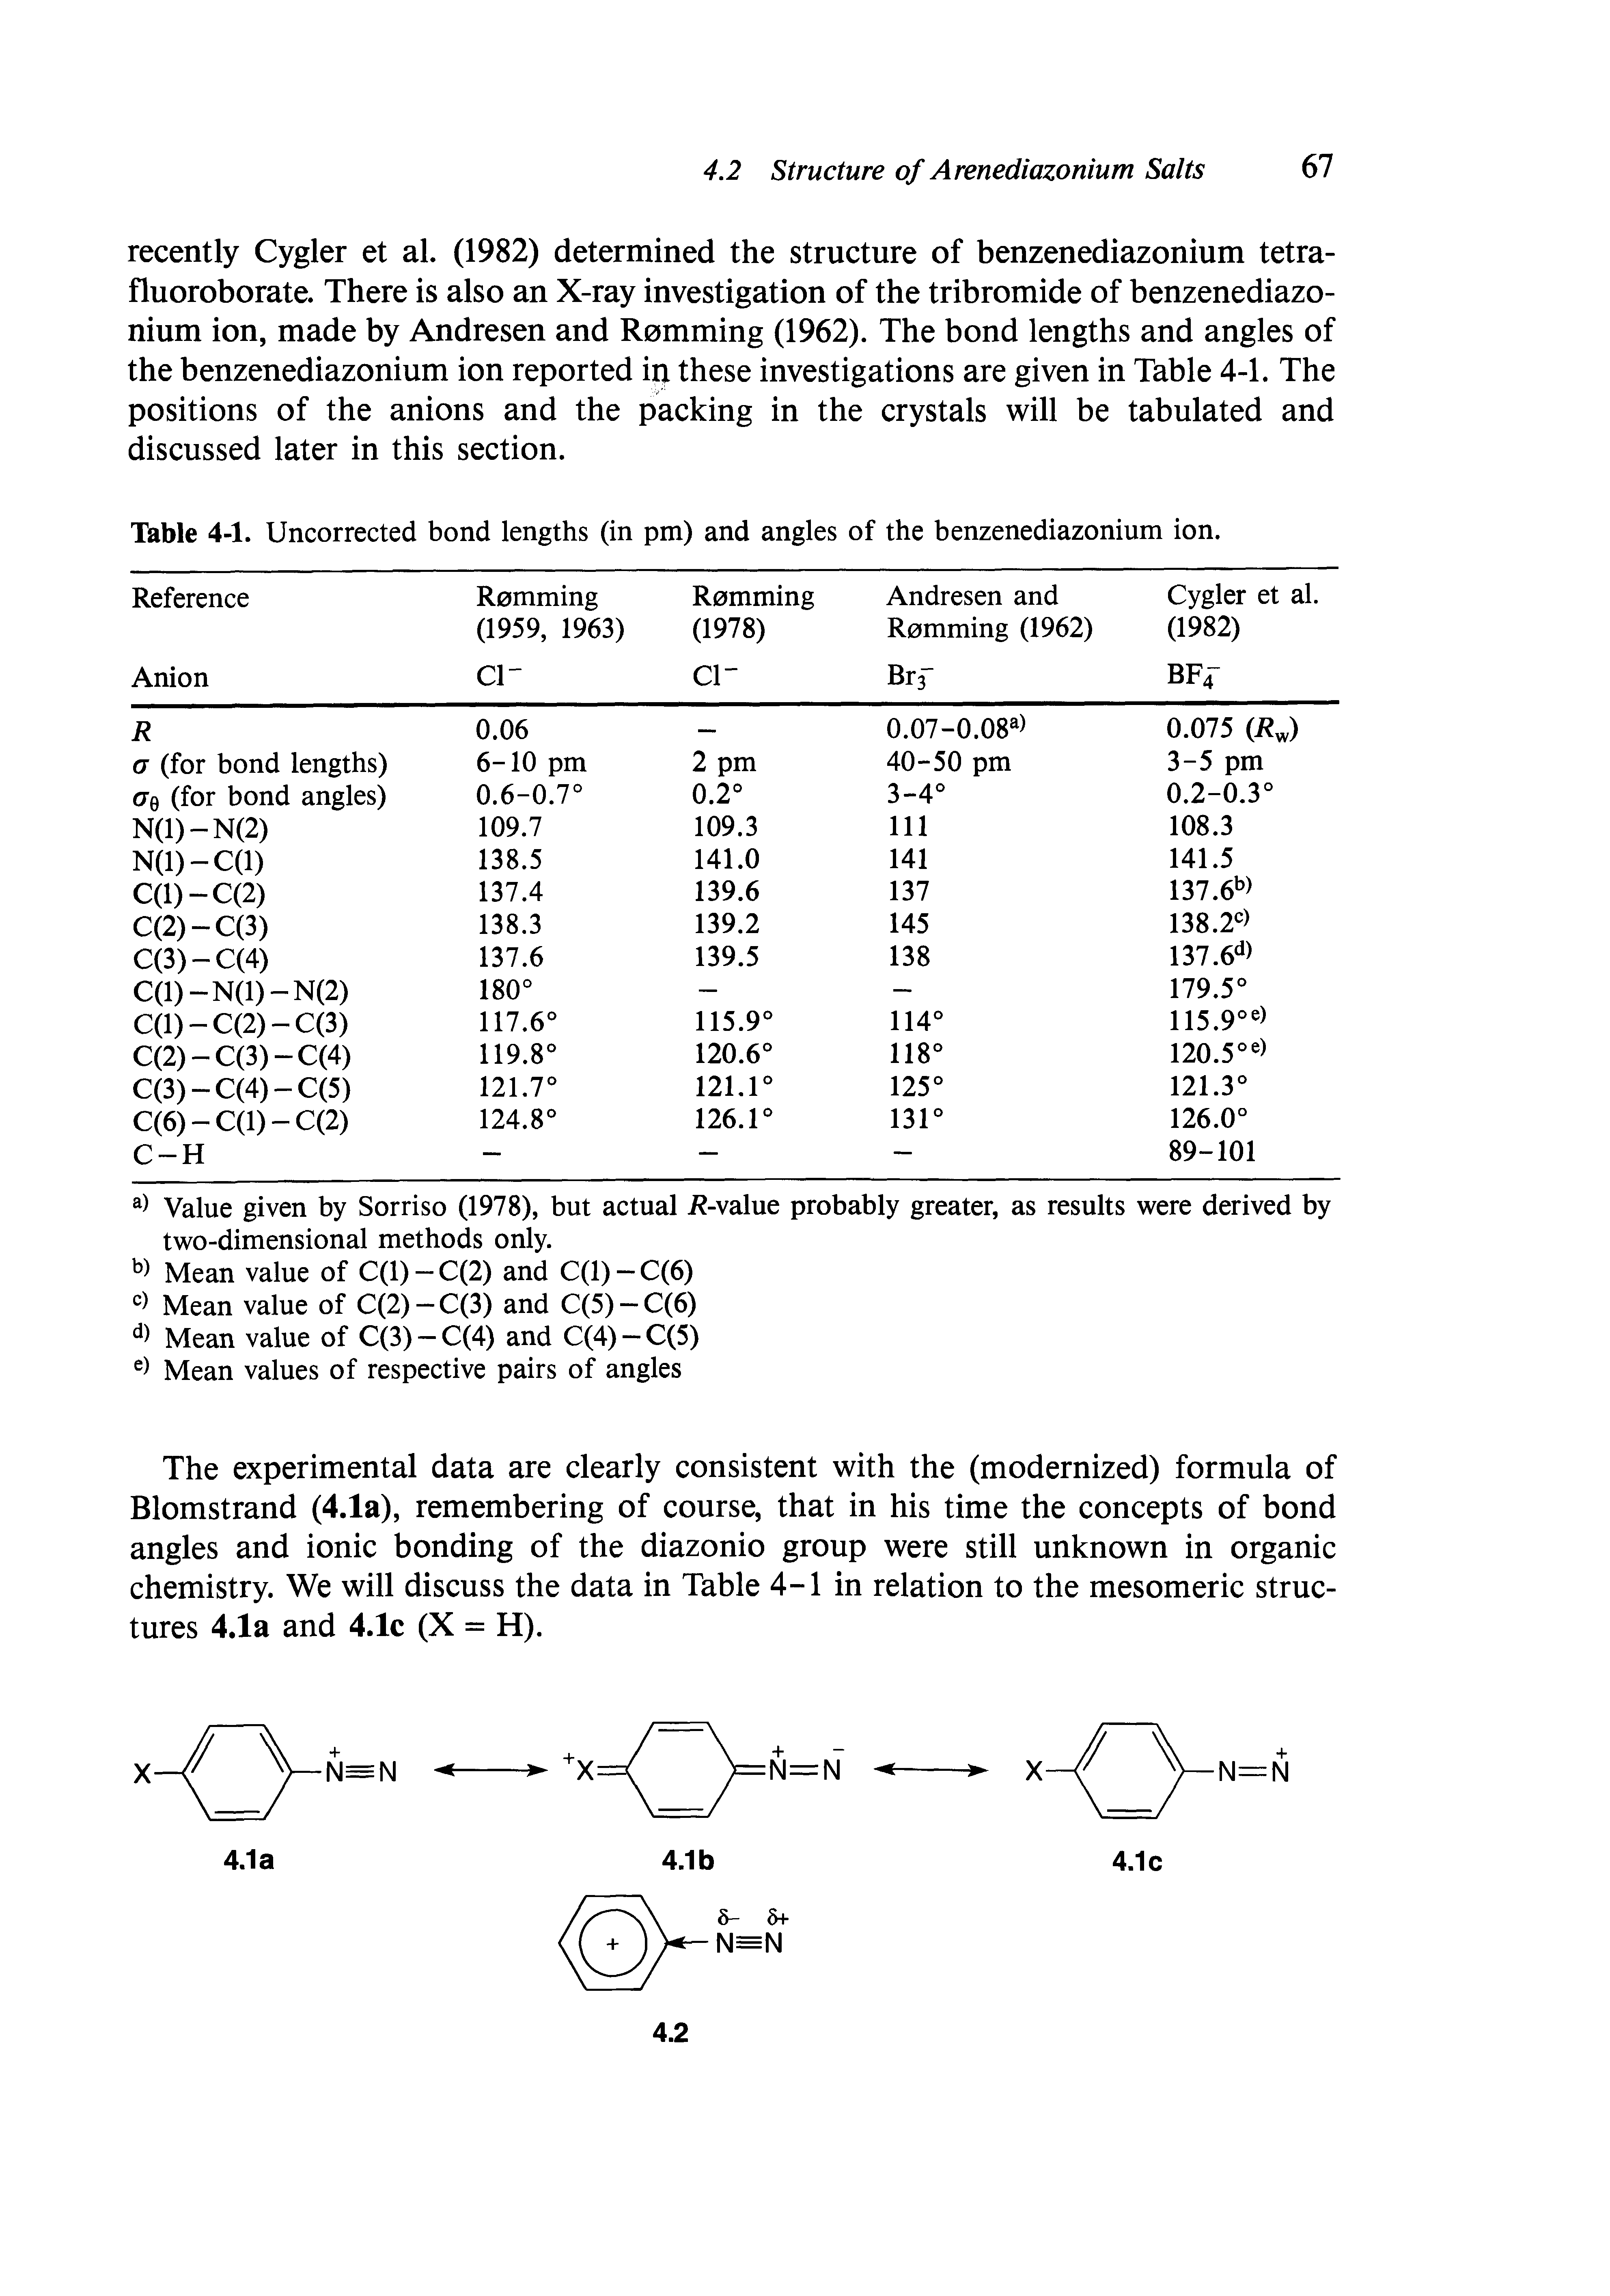 Table 4-1. Uncorrected bond lengths (in pm) and angles of the benzenediazonium ion.